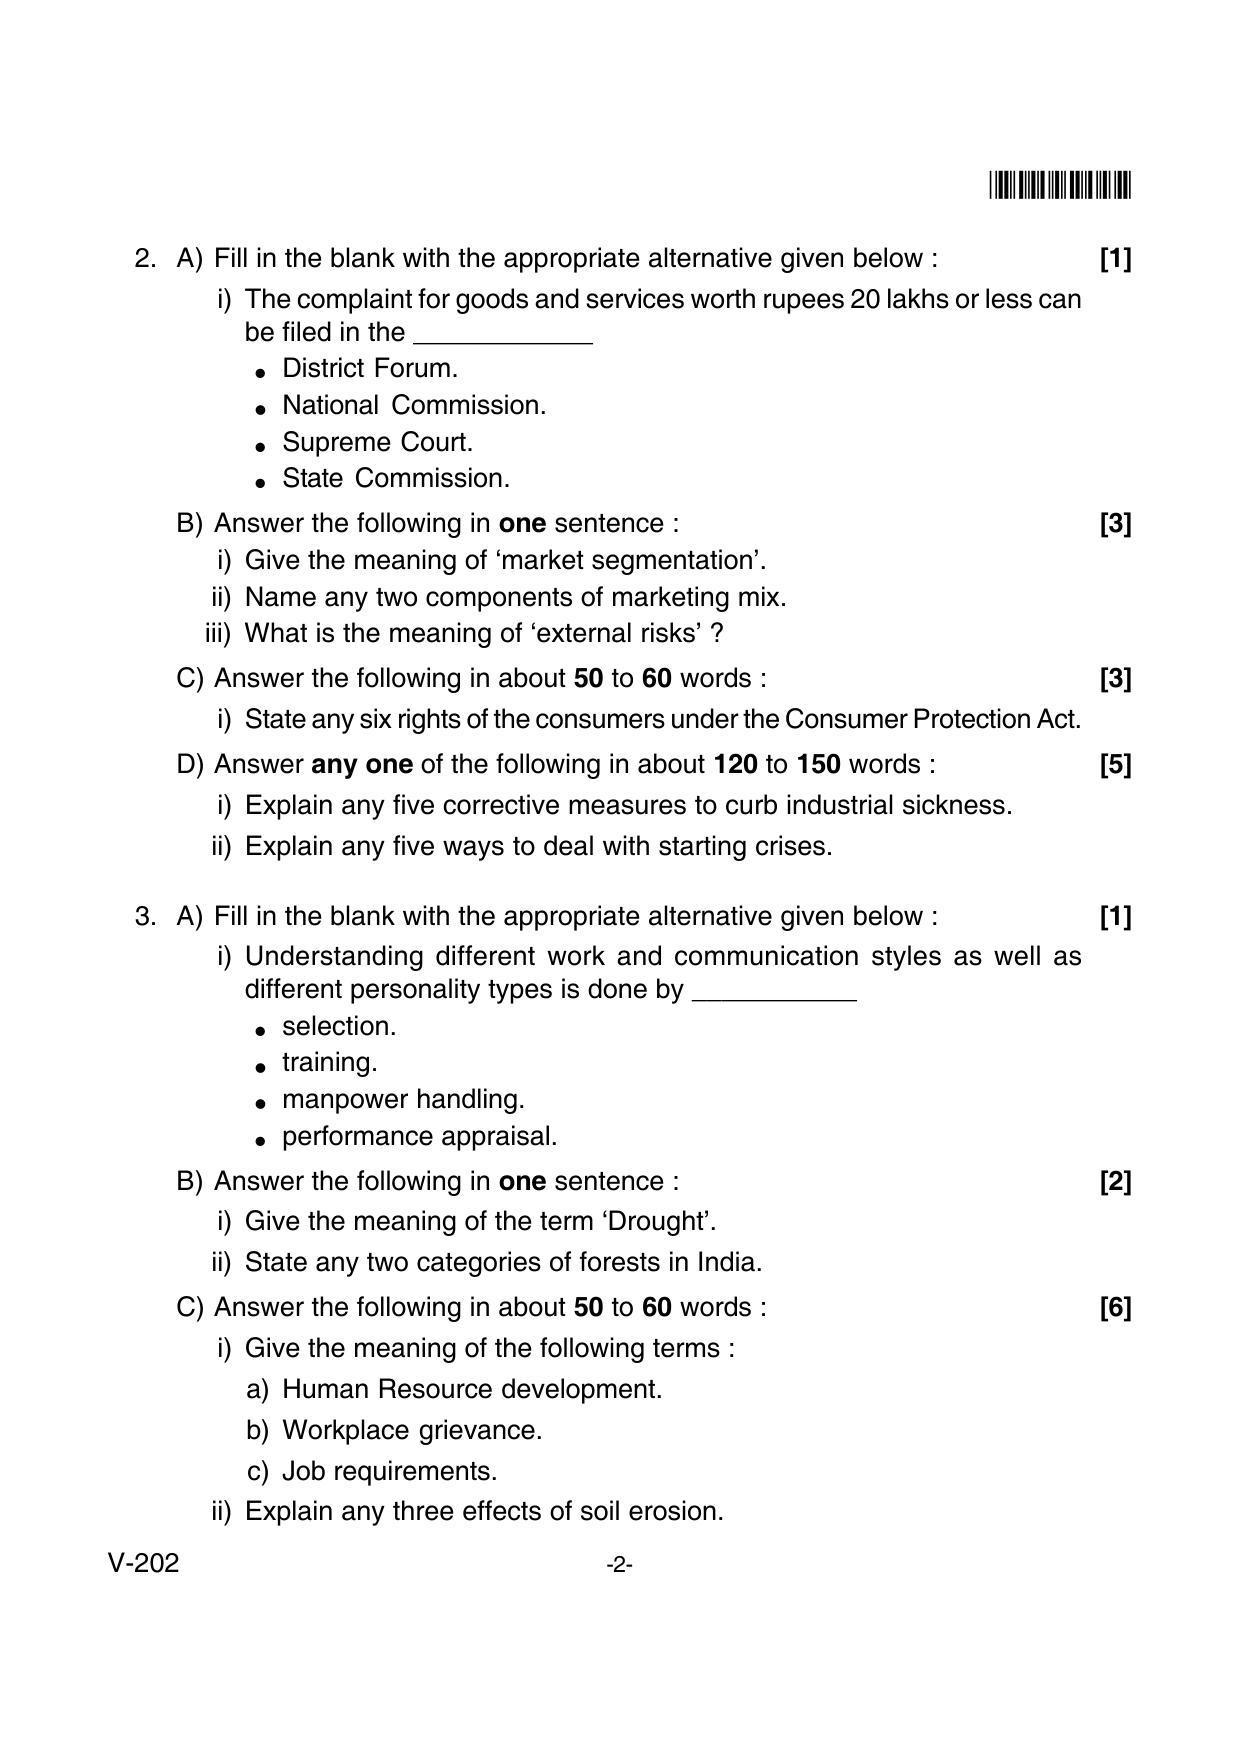 Goa Board Class 12 General Foundation Course  Voc 202 New Pattern (March 2018) Question Paper - Page 2